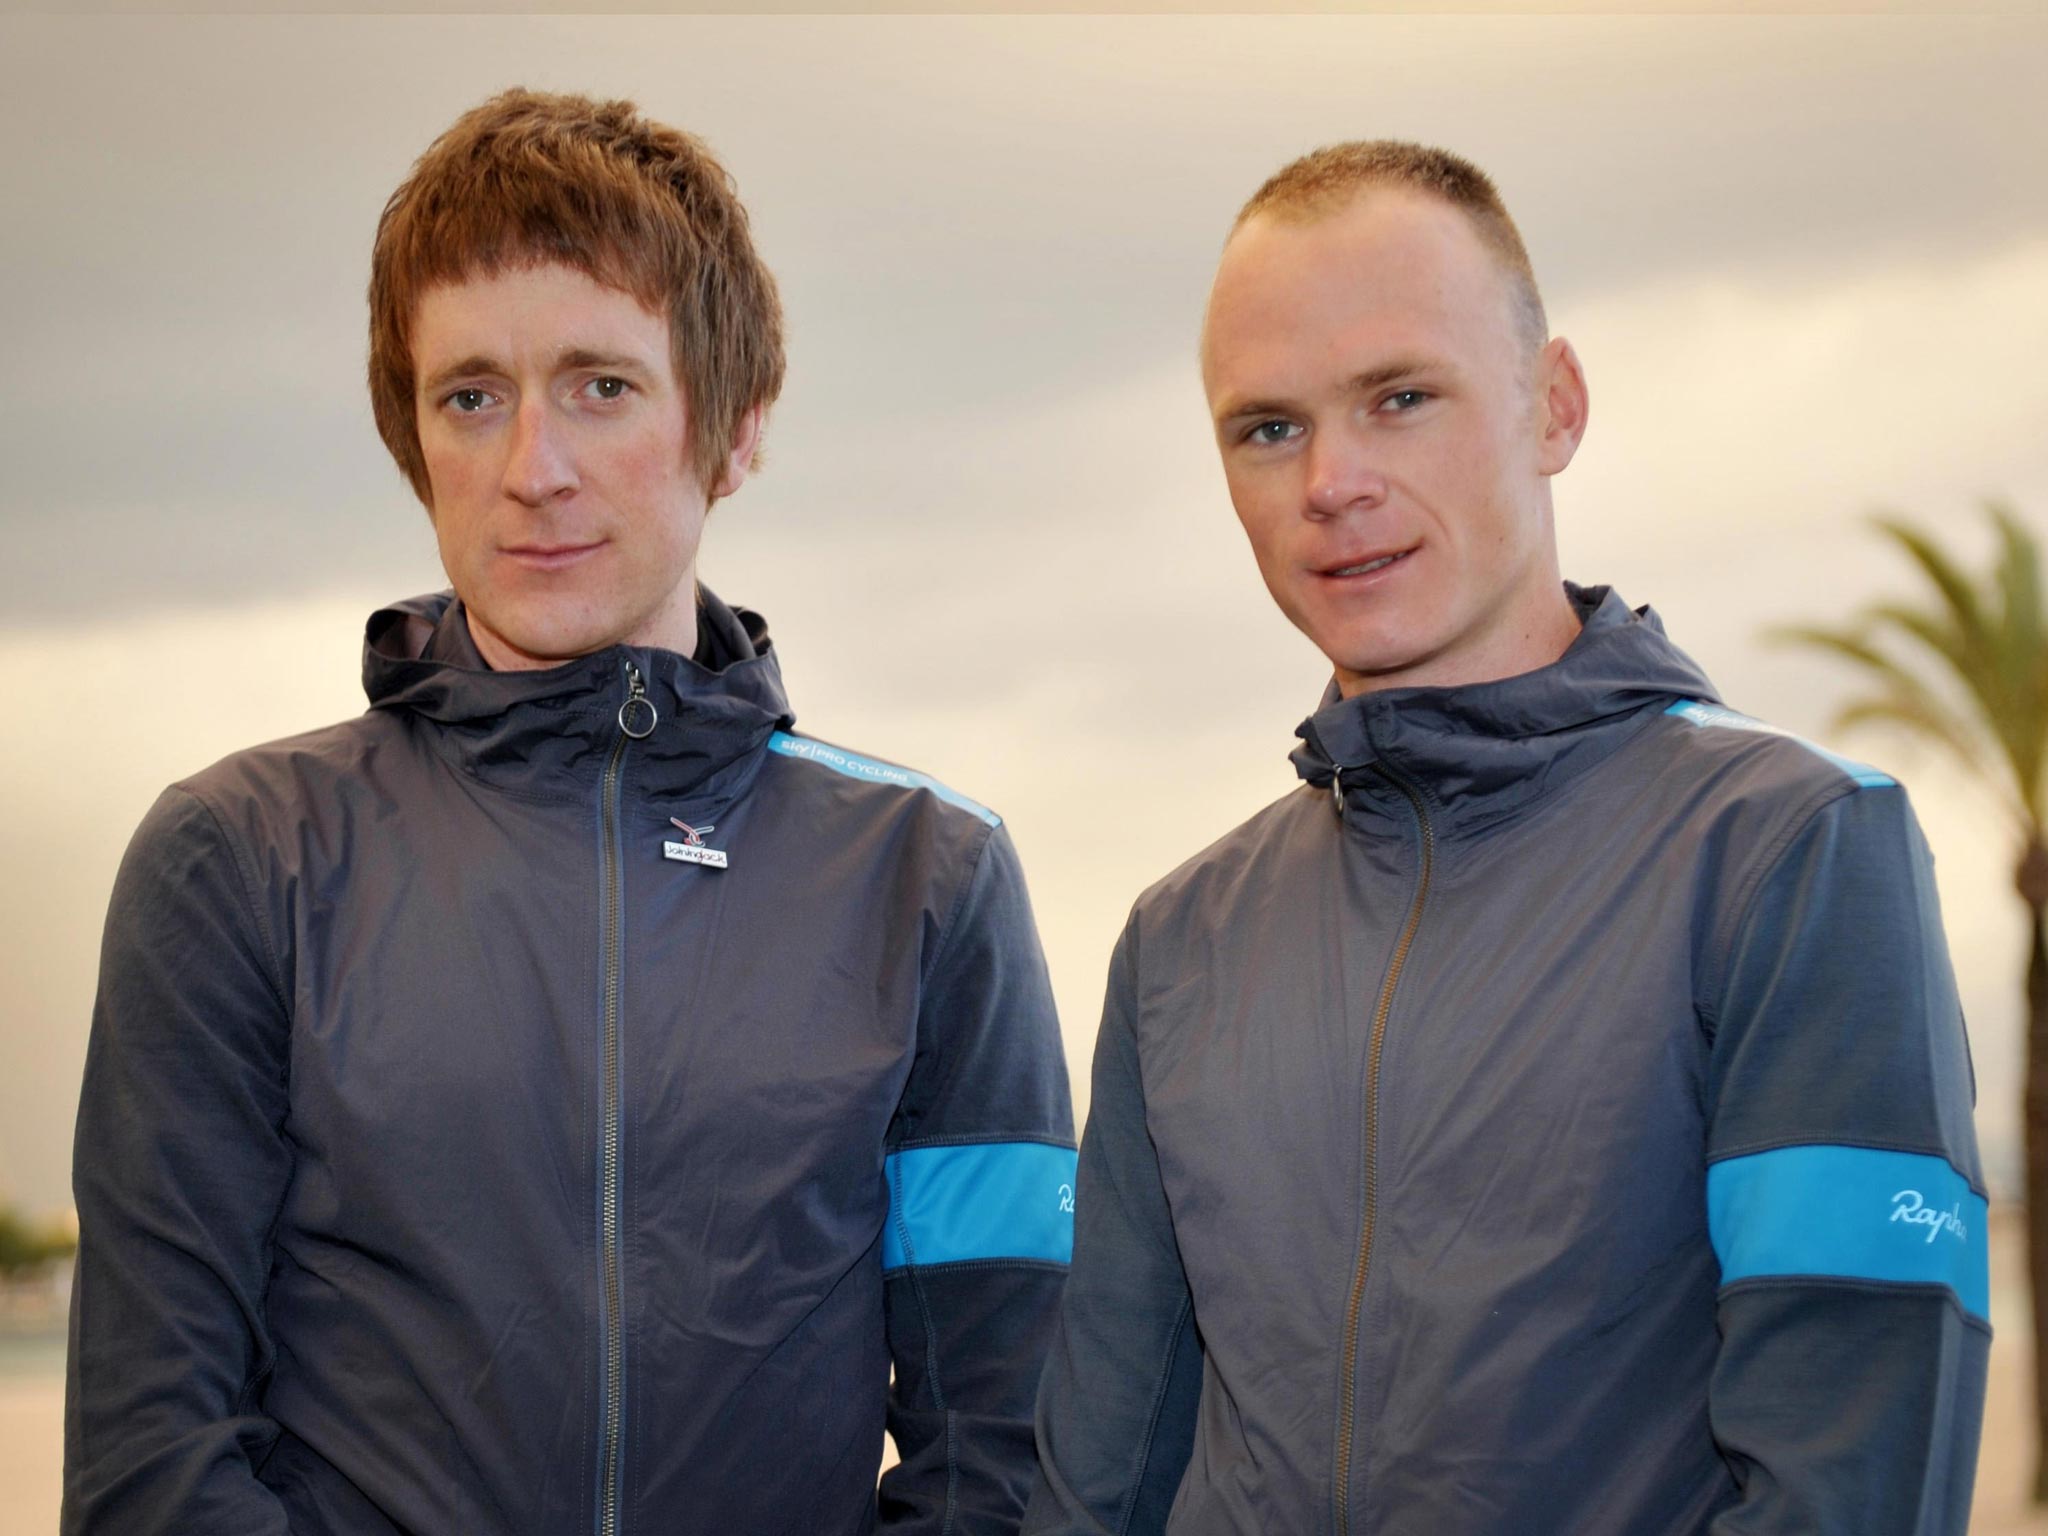 Sir Bradley Wiggins (left) said he would ride for Chris Froome (right) in this year’s Tour de France, but Team Sky decided otherwise